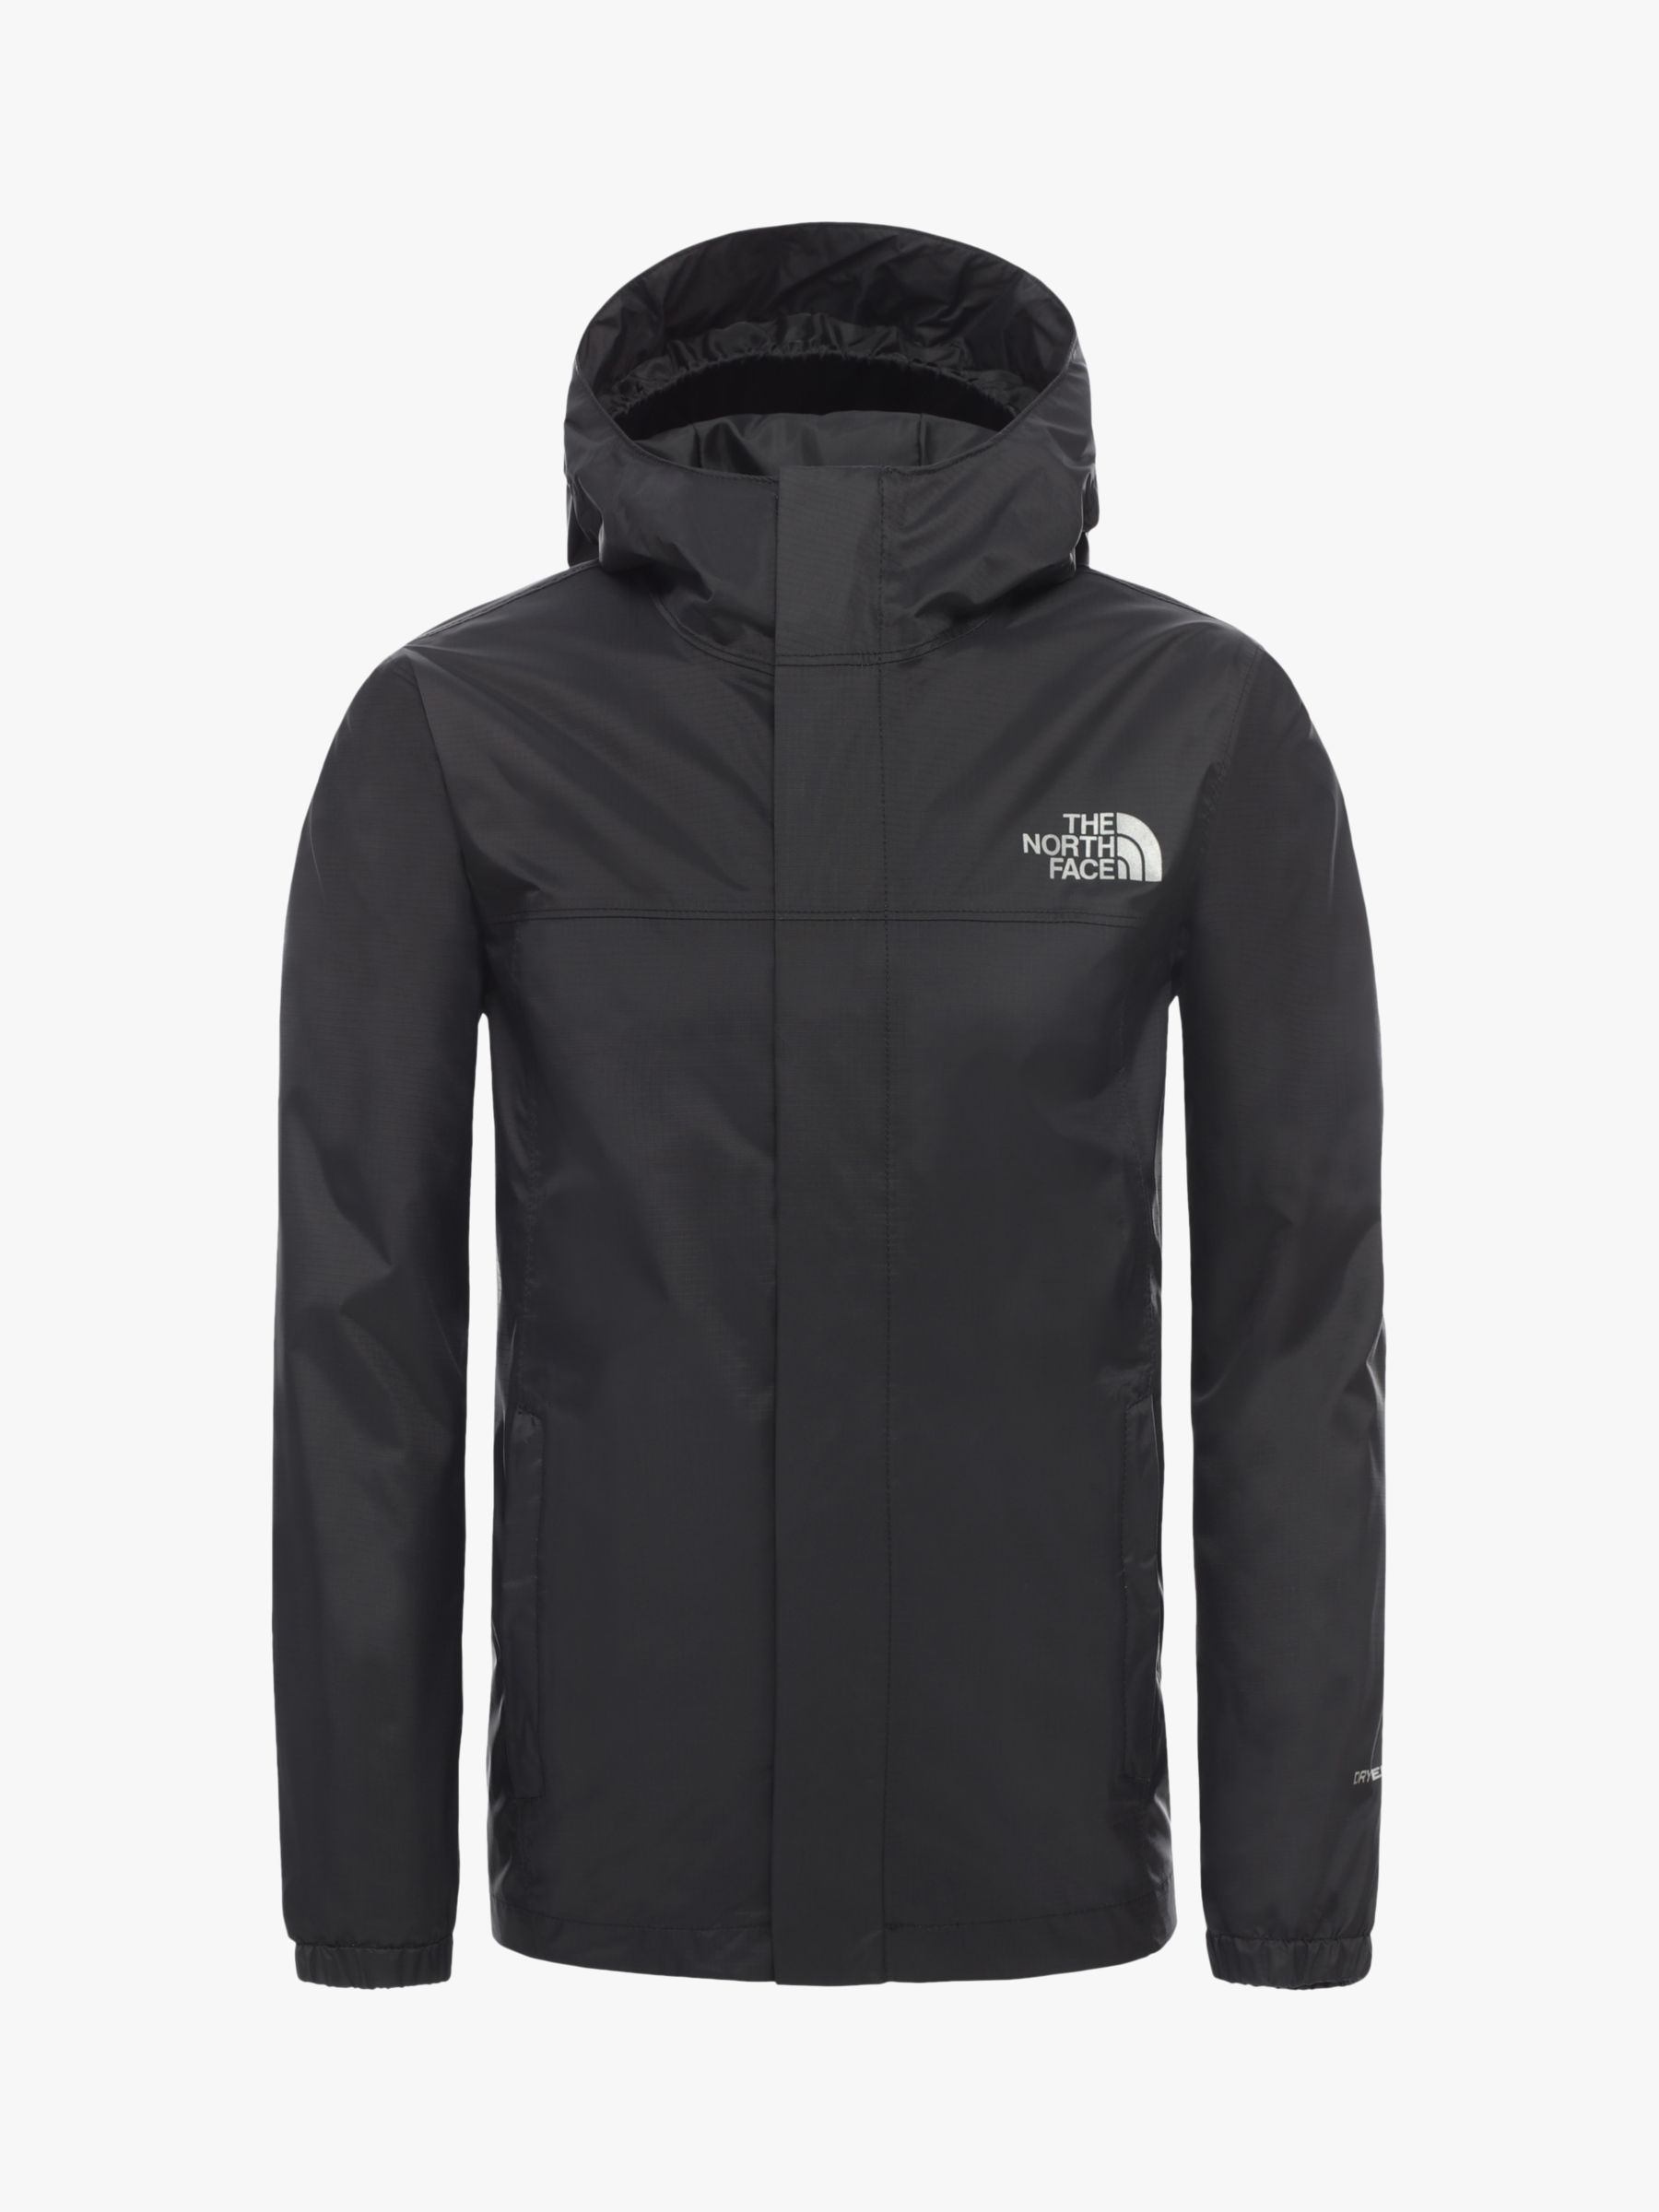 The North Face Kids' Resolve Waterproof 